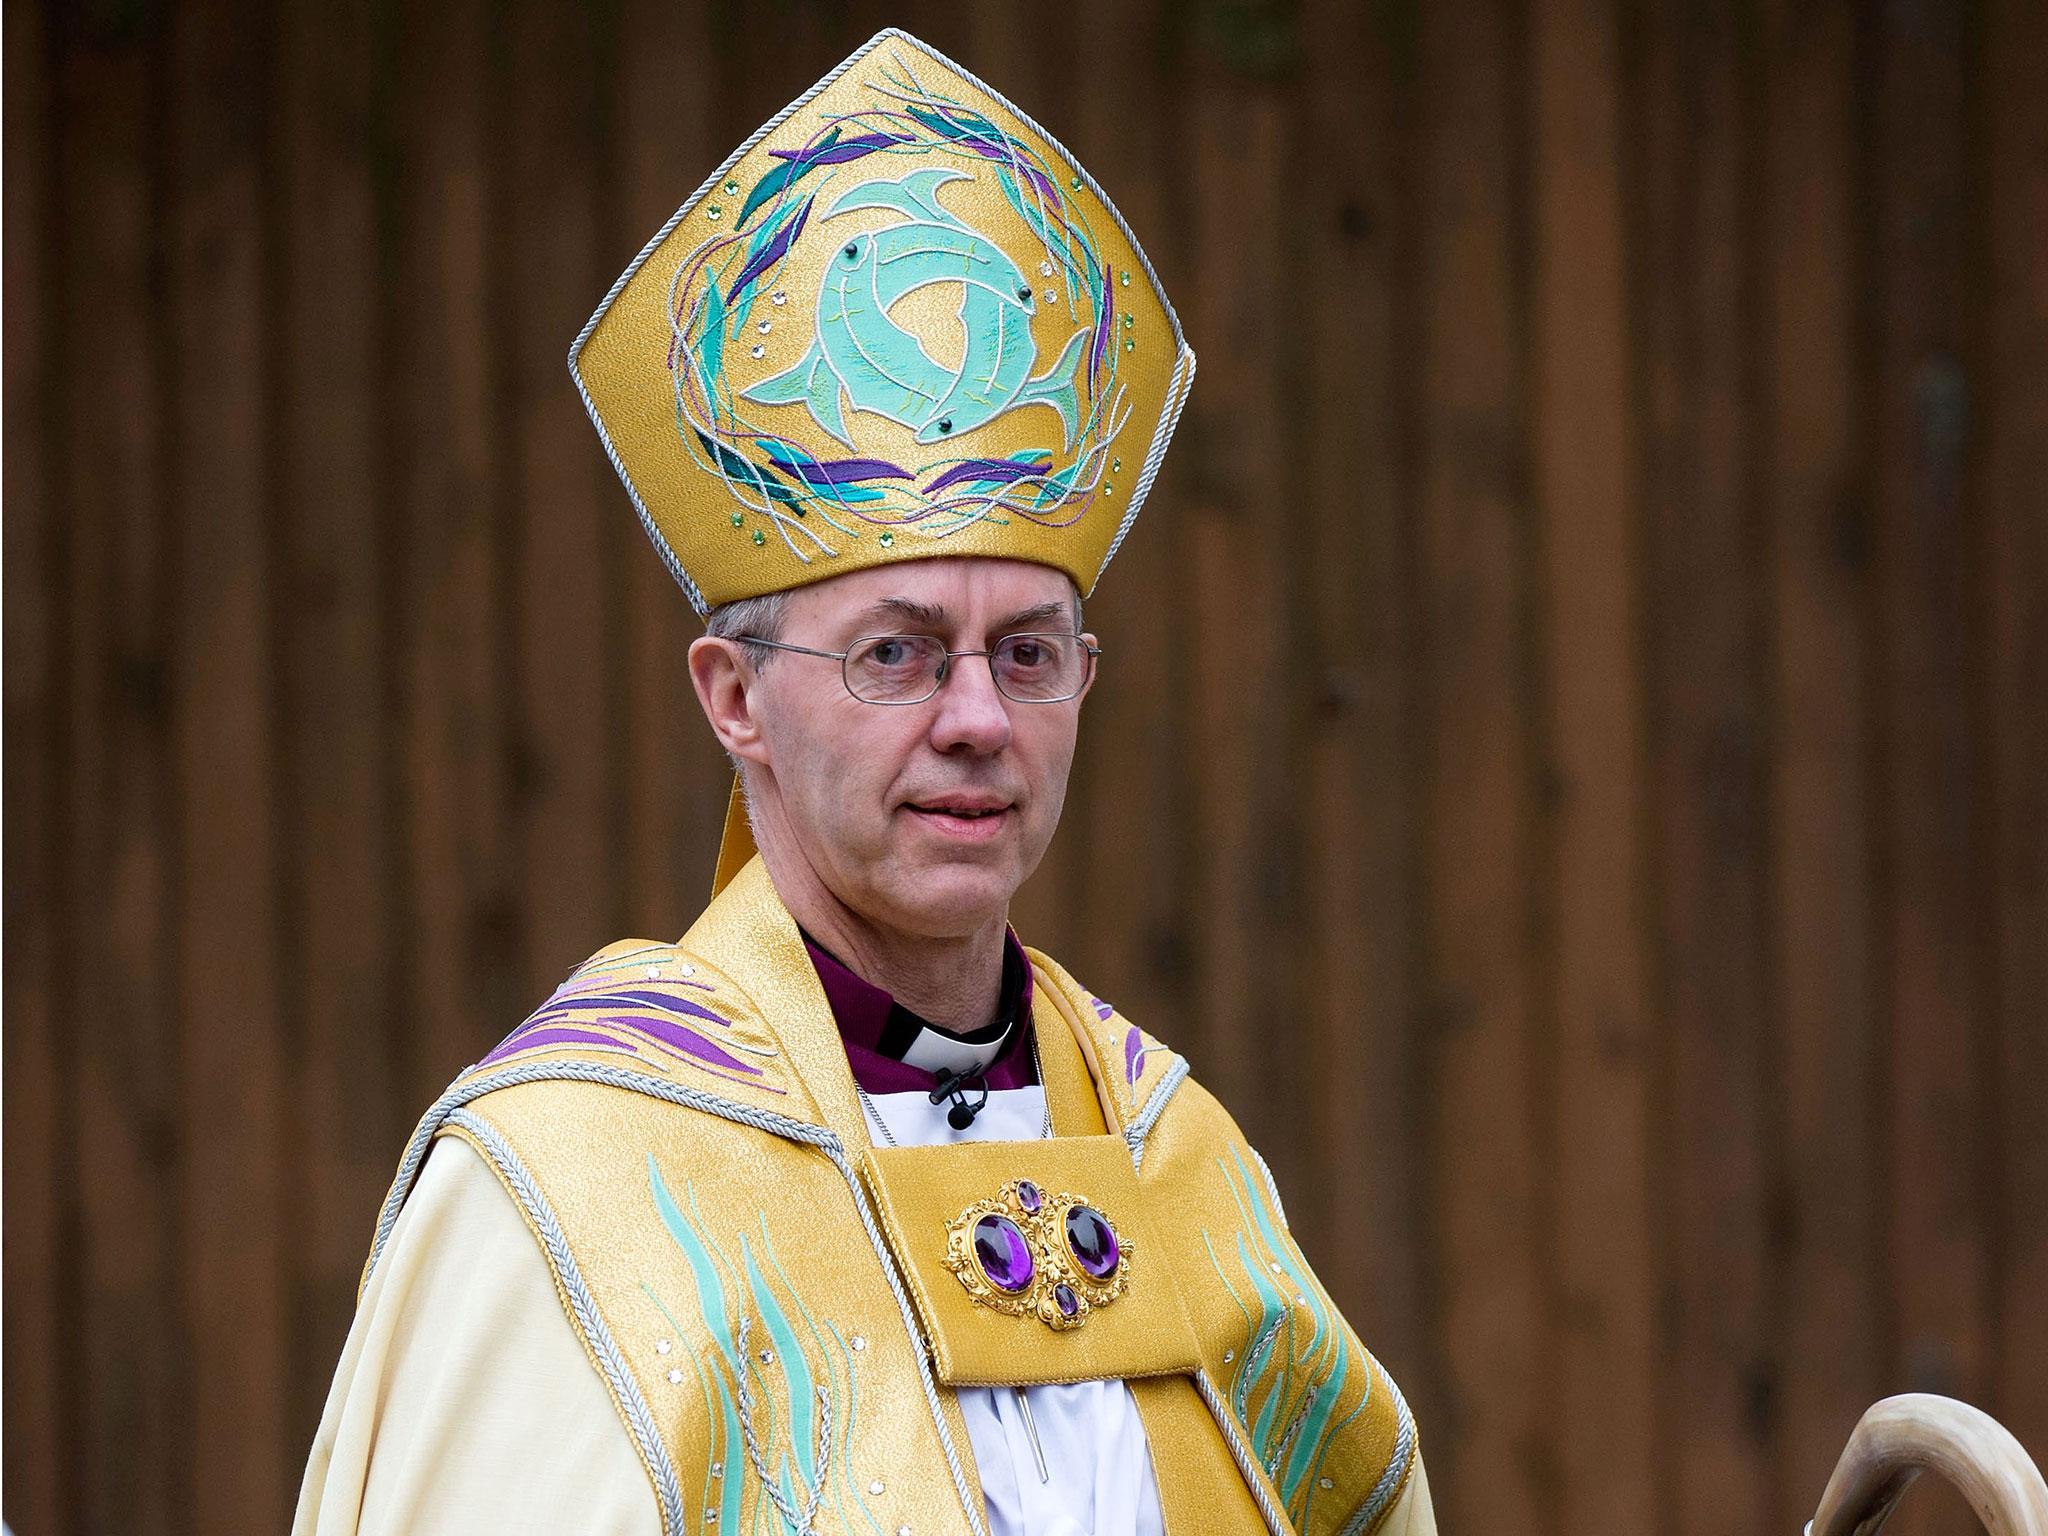 Head of the Church of England hails public response as 'a victory for what's right and good over what is evil, despairing and bad'